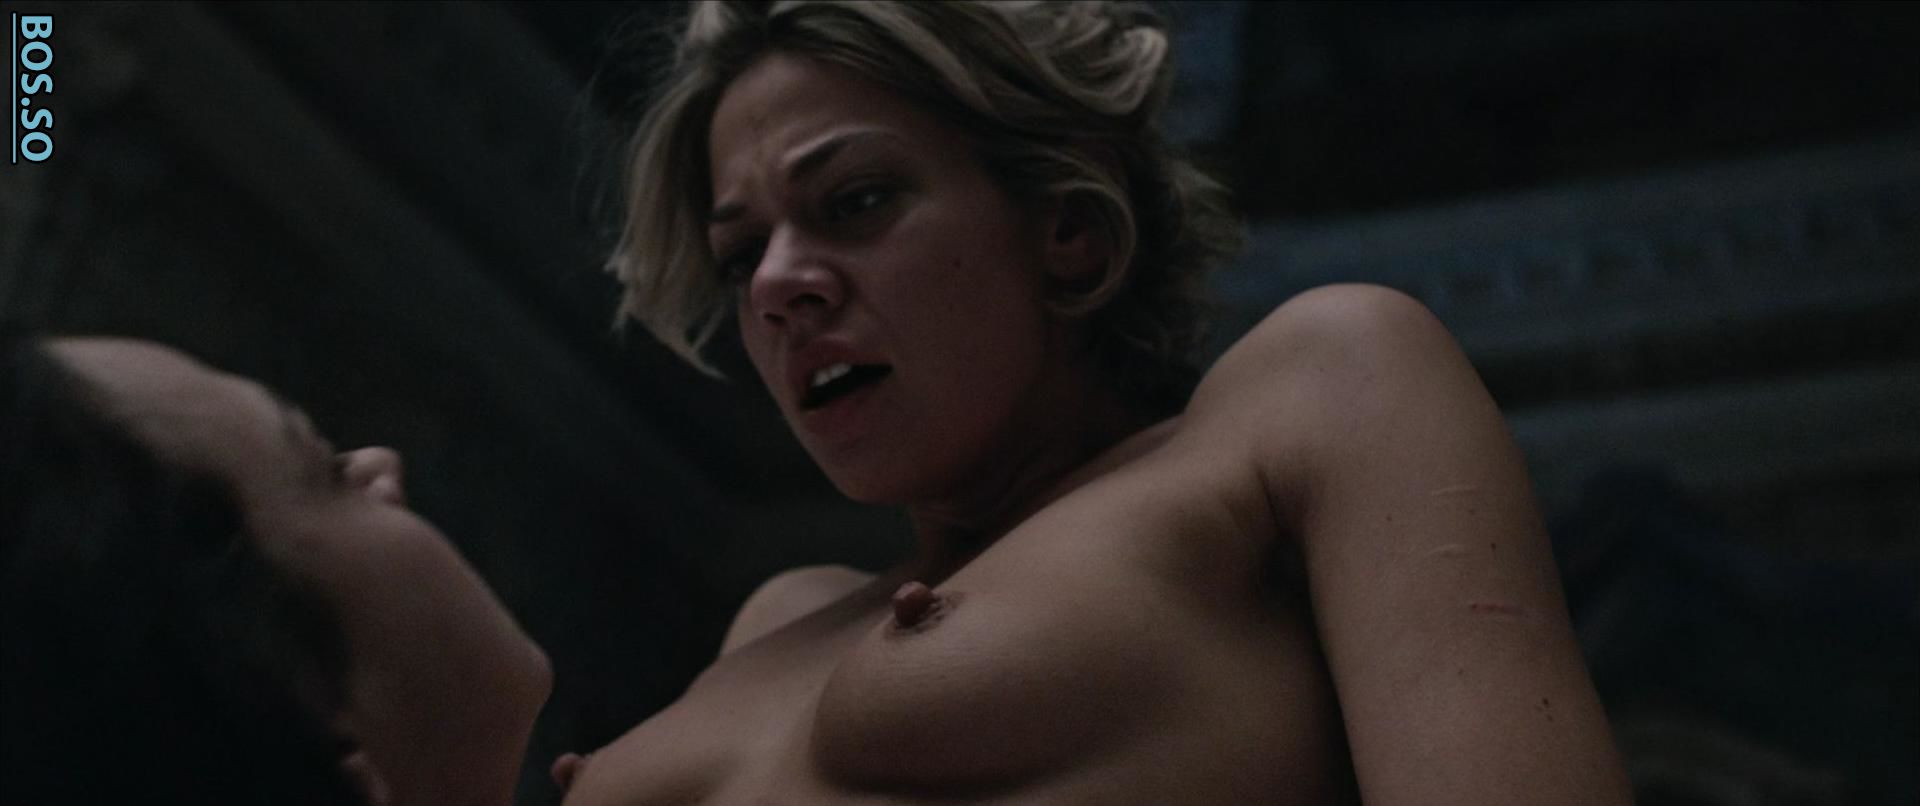 Analeigh Tipton Nude.